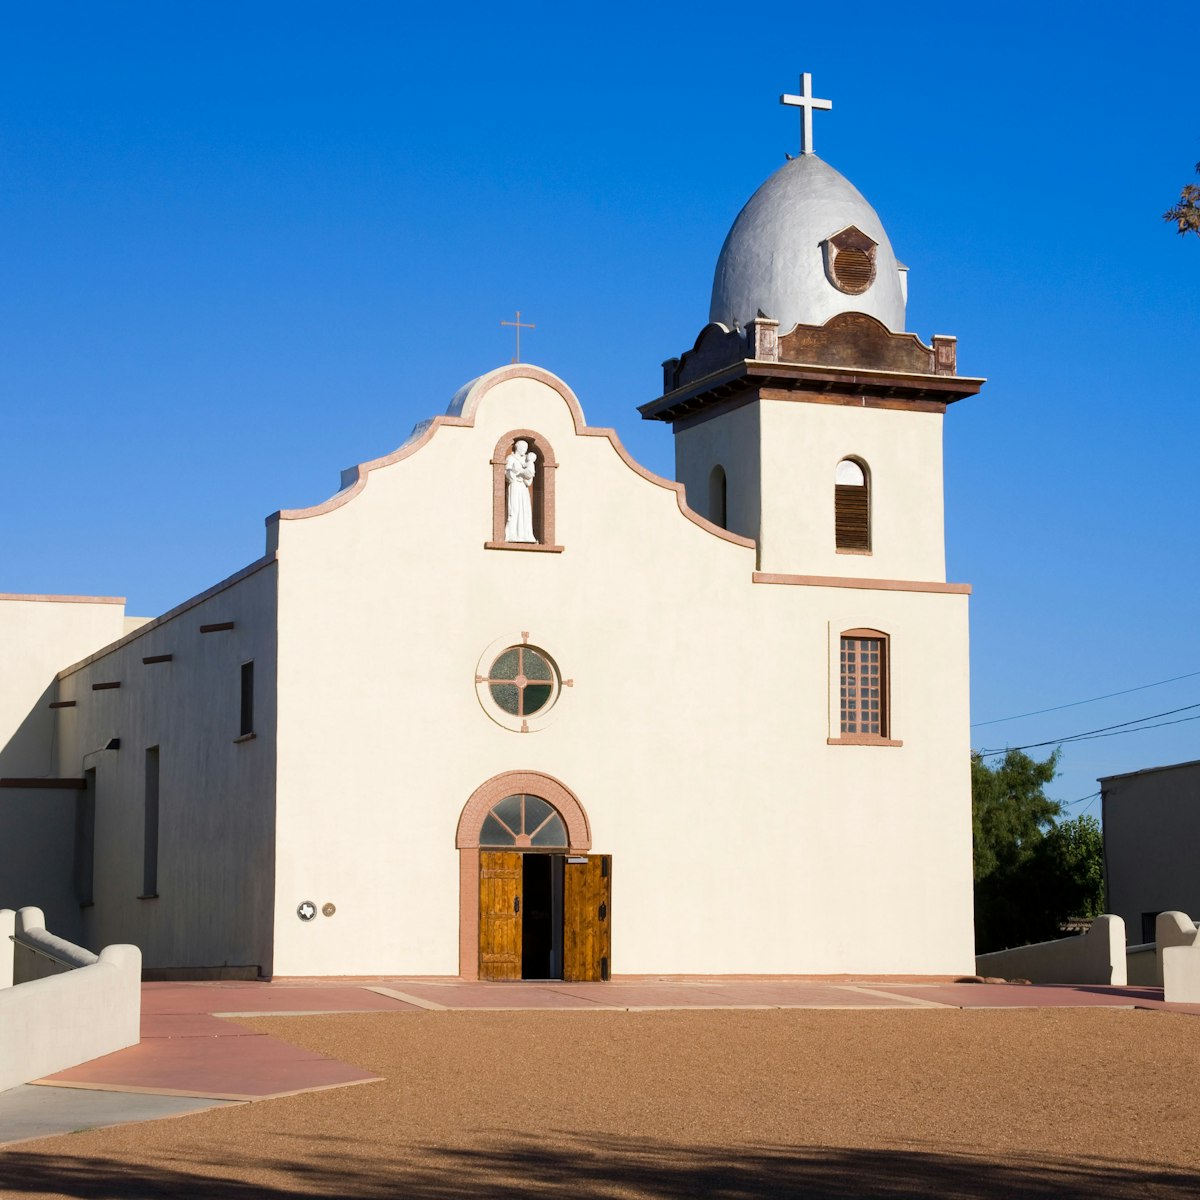 Ysleta Mission on the Tigua Indian Reservation, El Paso, Texas, United States of America, North America